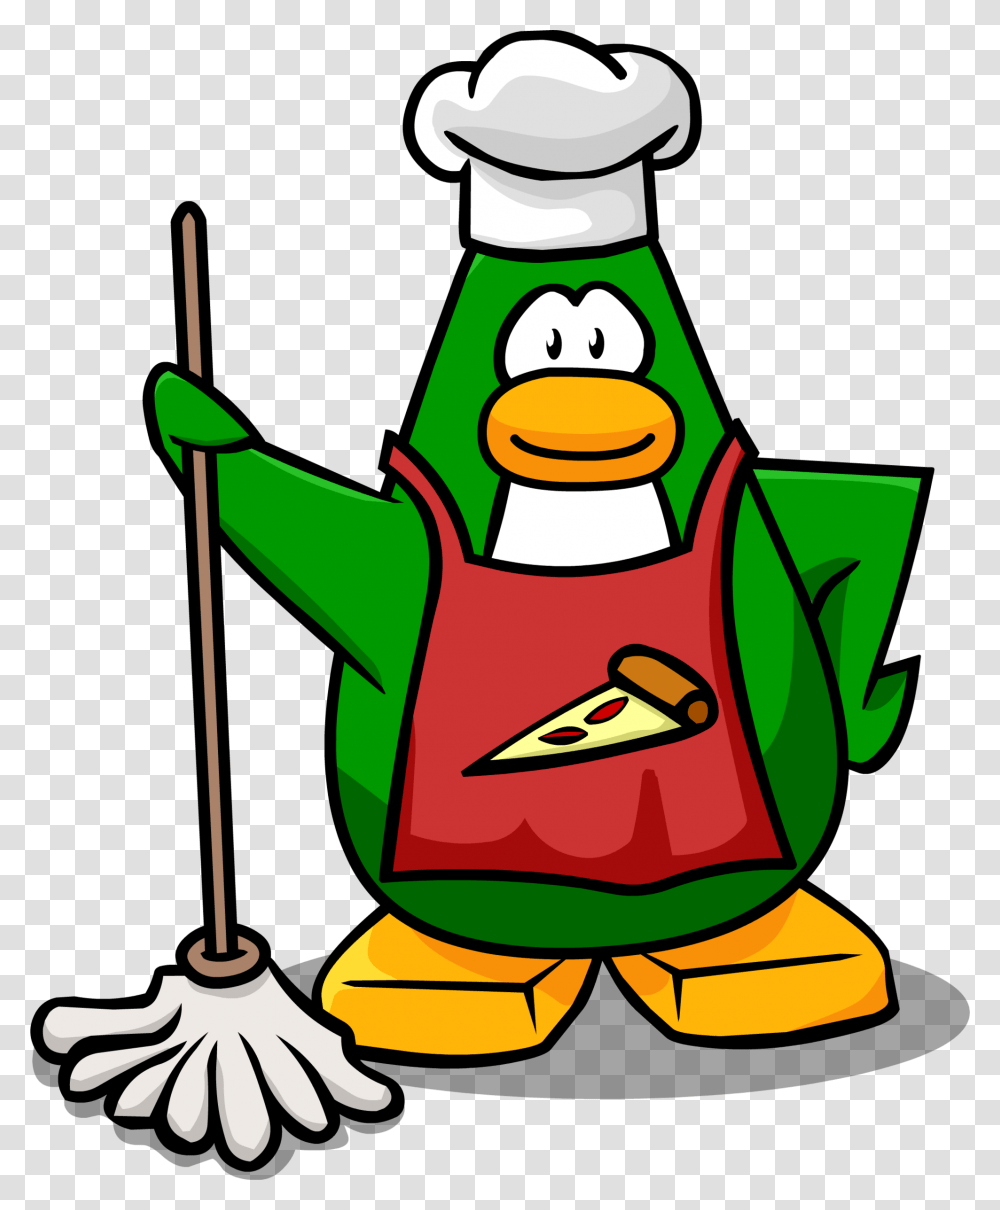 Club Penguin Rewritten Wiki Club Penguin Pizza Chef, Food, Snowman, Winter, Outdoors Transparent Png